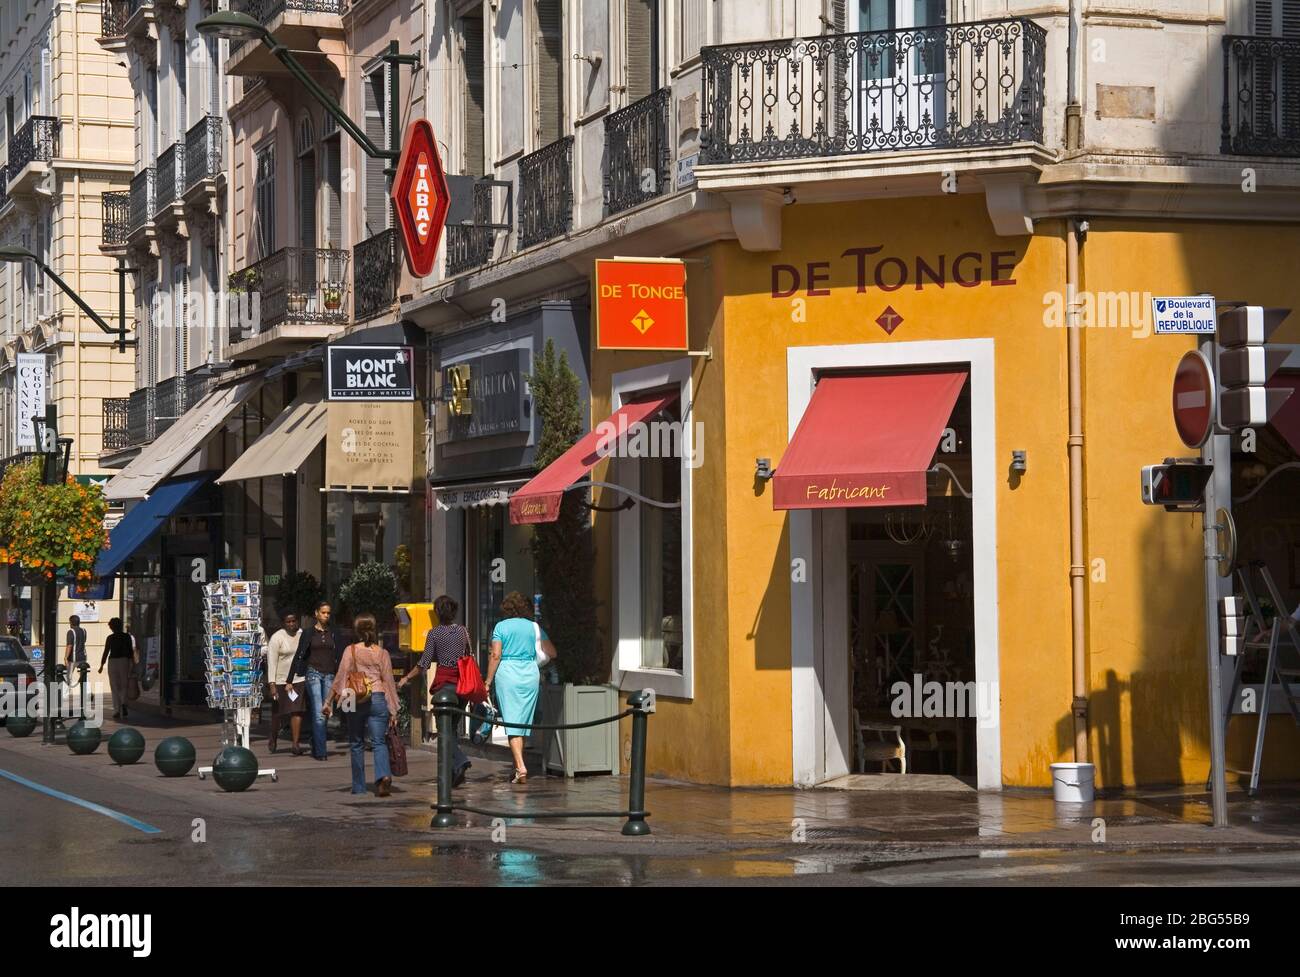 Rue d' Antibes, City of Cannes, France Stock Photo - Alamy